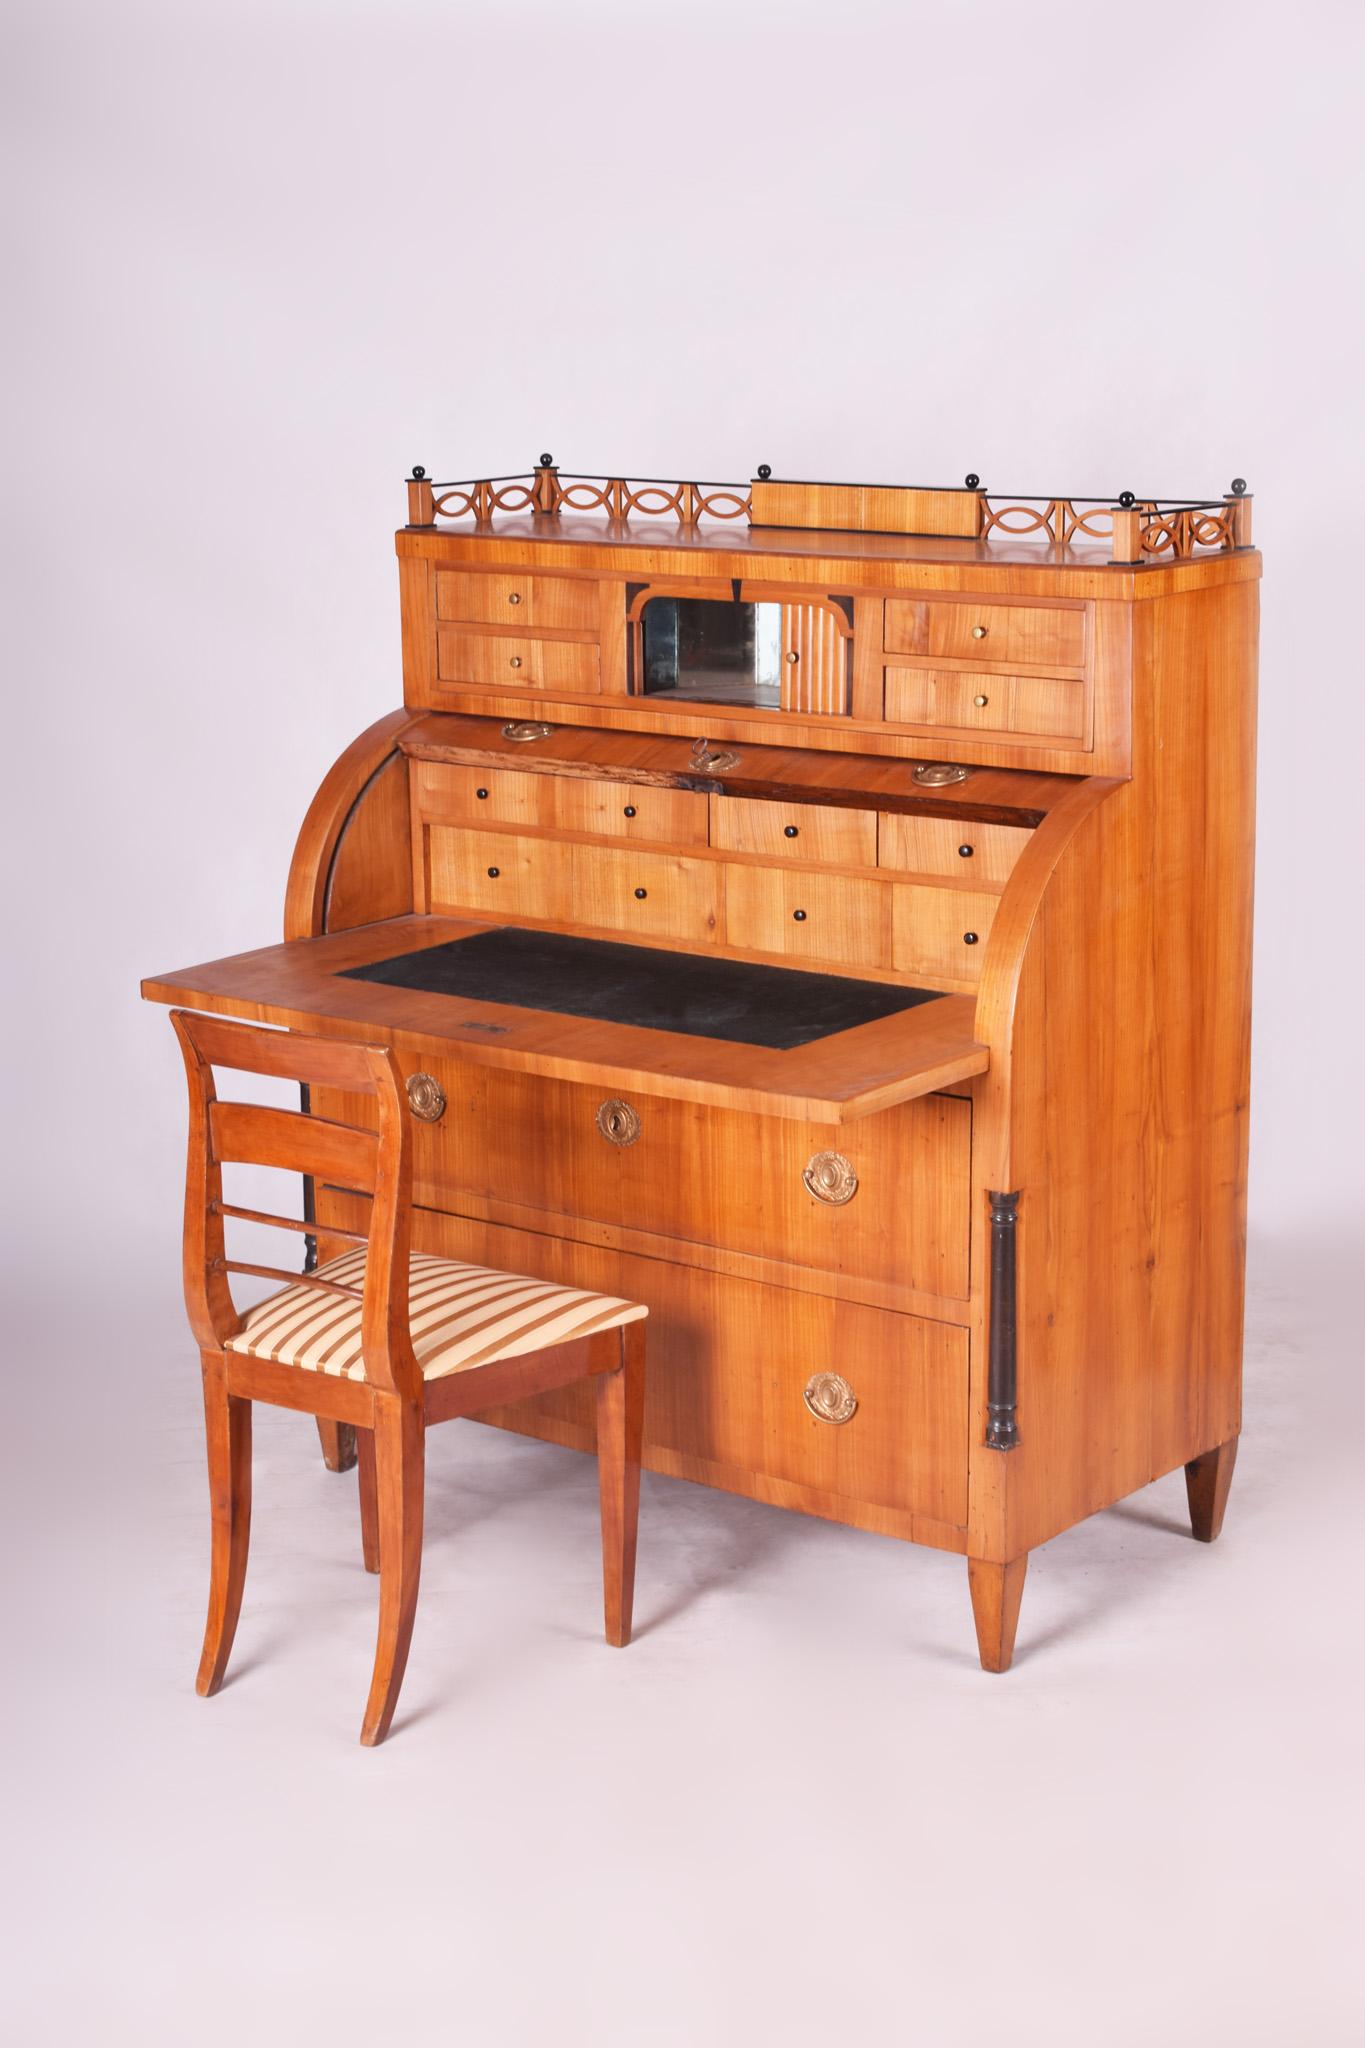 Shipping to any US port only for $290 USD

Empire Secretary/Writing desk - (Cylinder)
Material: cheerywood. 
Completely restored, Shellac polish.
Period: 1810-1819
Source: Austria, Wien.

We guarantee safe a the cheapest air transport from Europe to